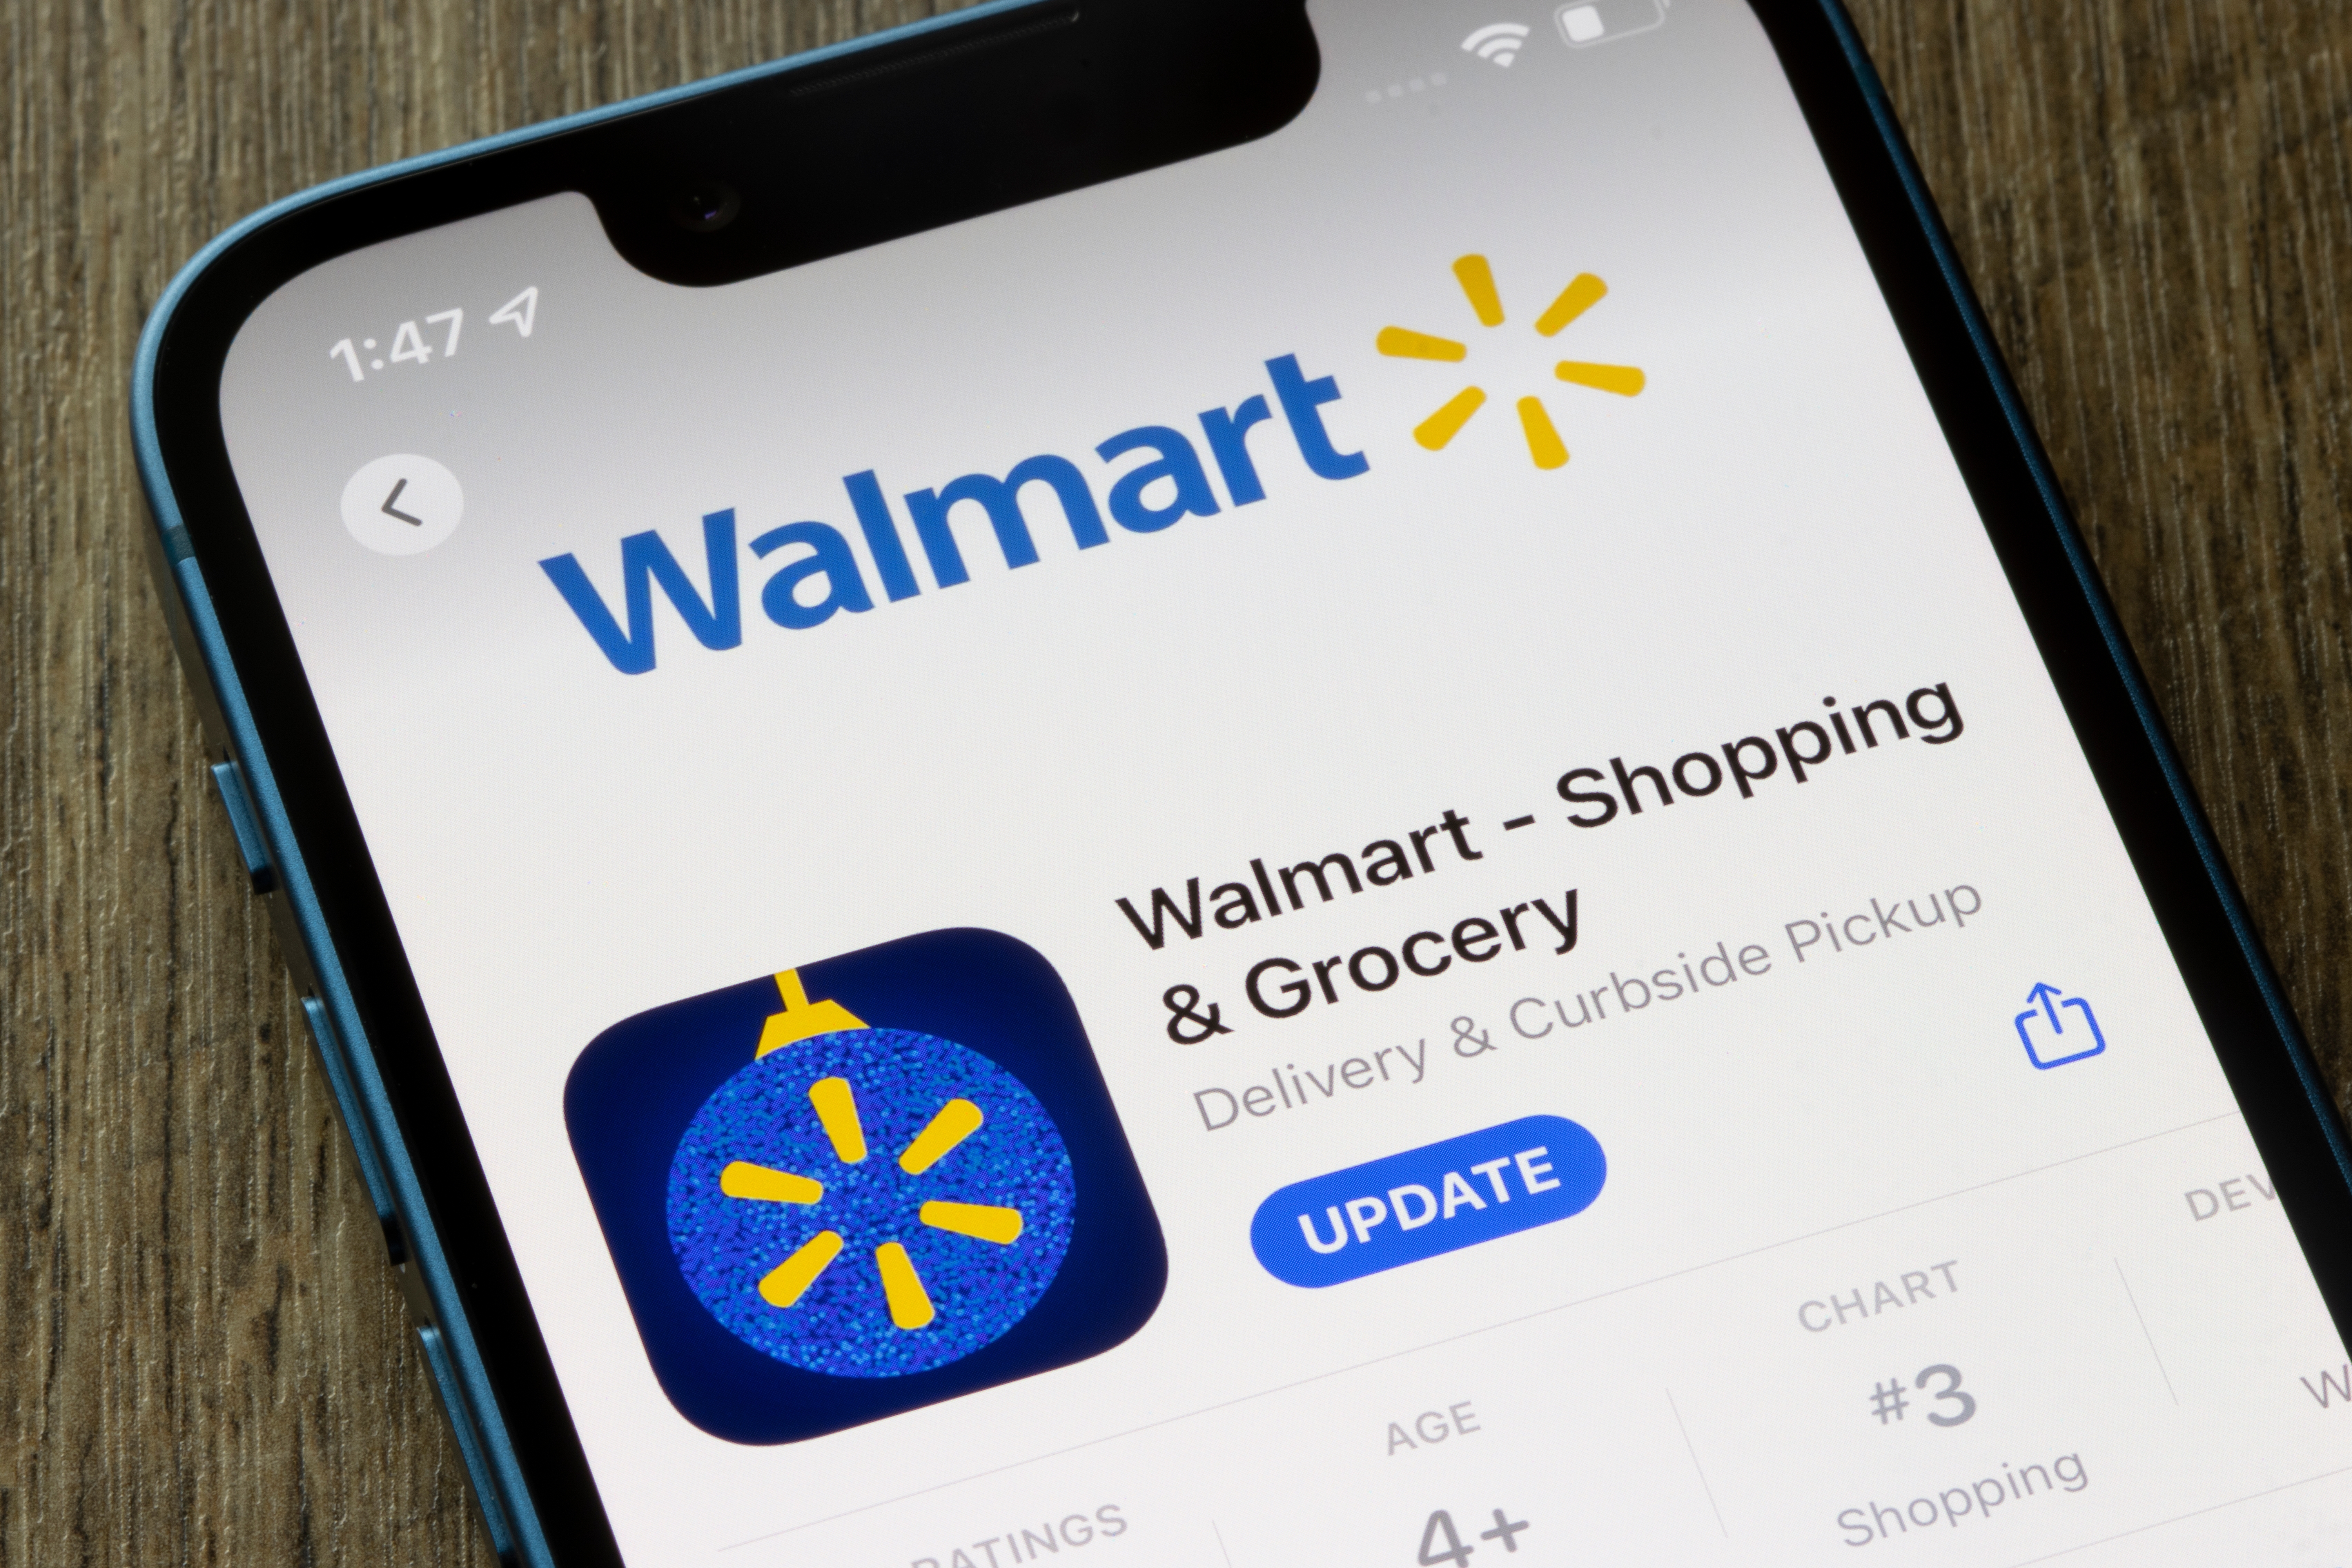 What types of warranties does Walmart offer on electronics?